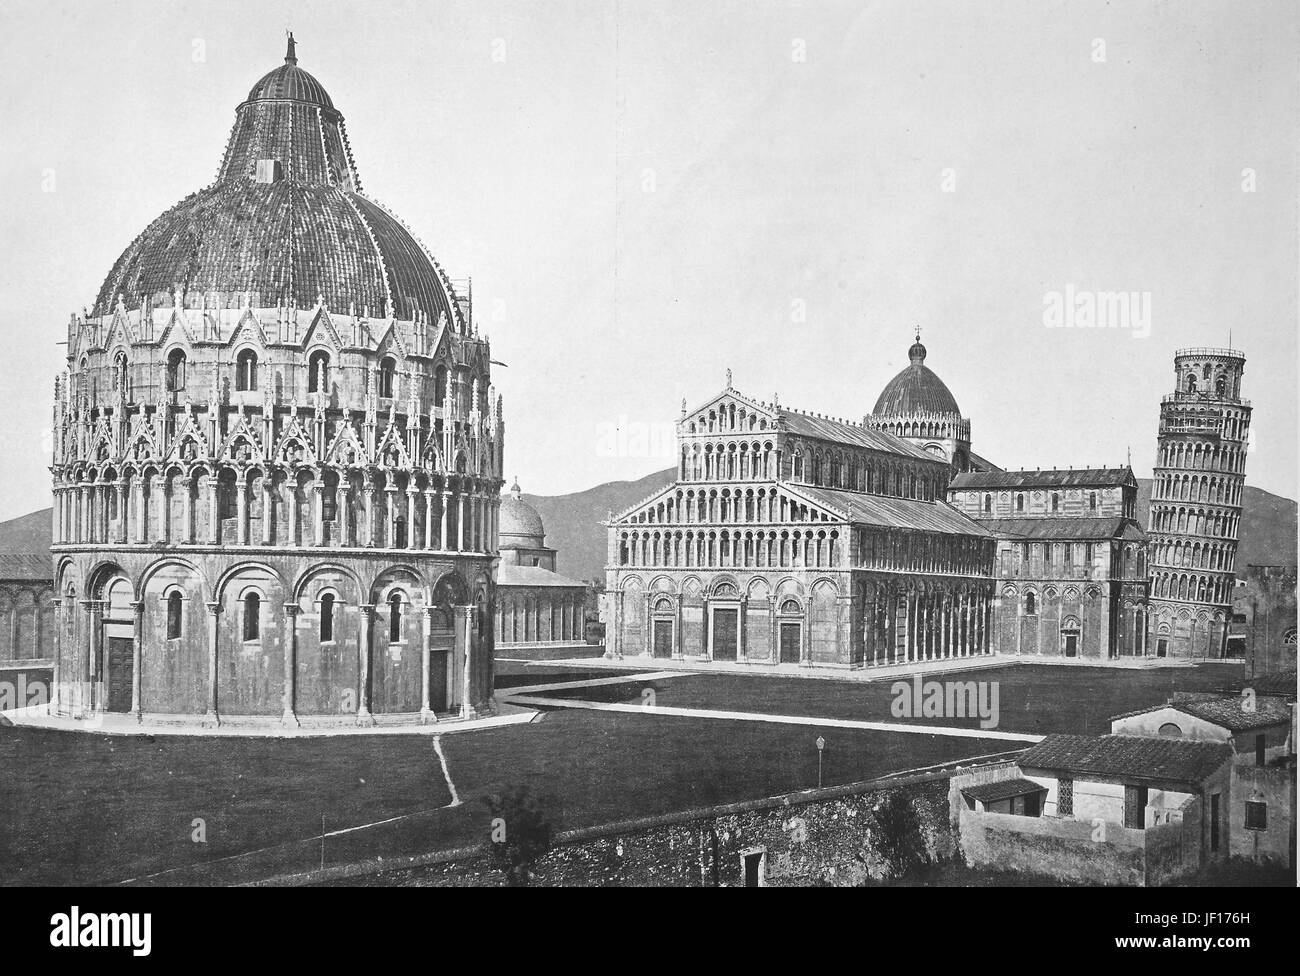 Historical photo of Pisa, View of the Piazza dei Miracoli, leaning Tower of Pisa and Baptistry, Tuscany, Italy,  Digital improved reproduction from an original print from 1890 Stock Photo